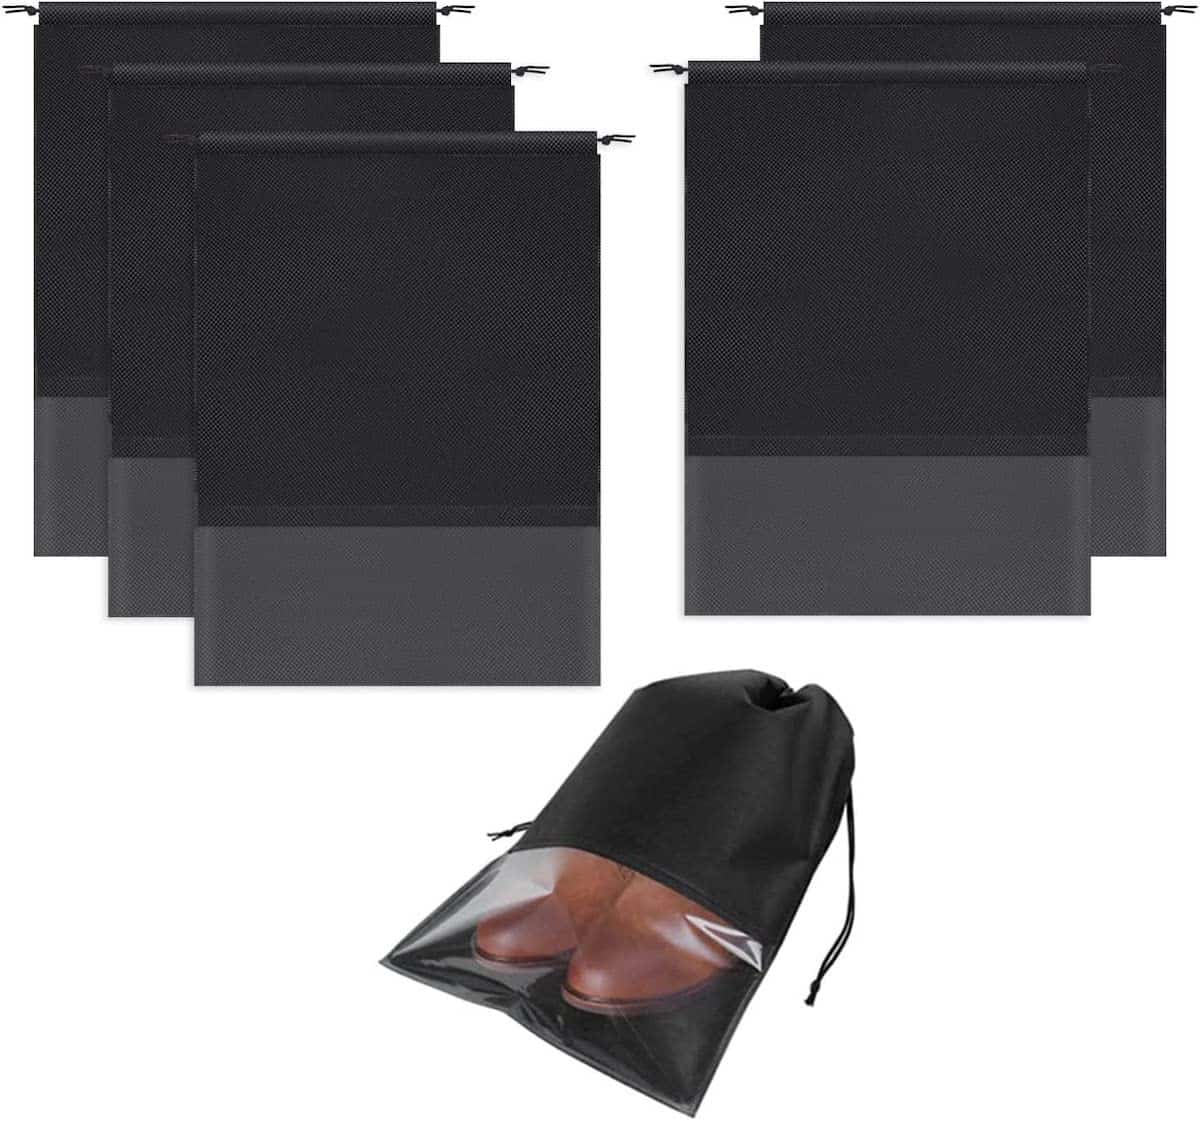 5-pack of travel shoe bags